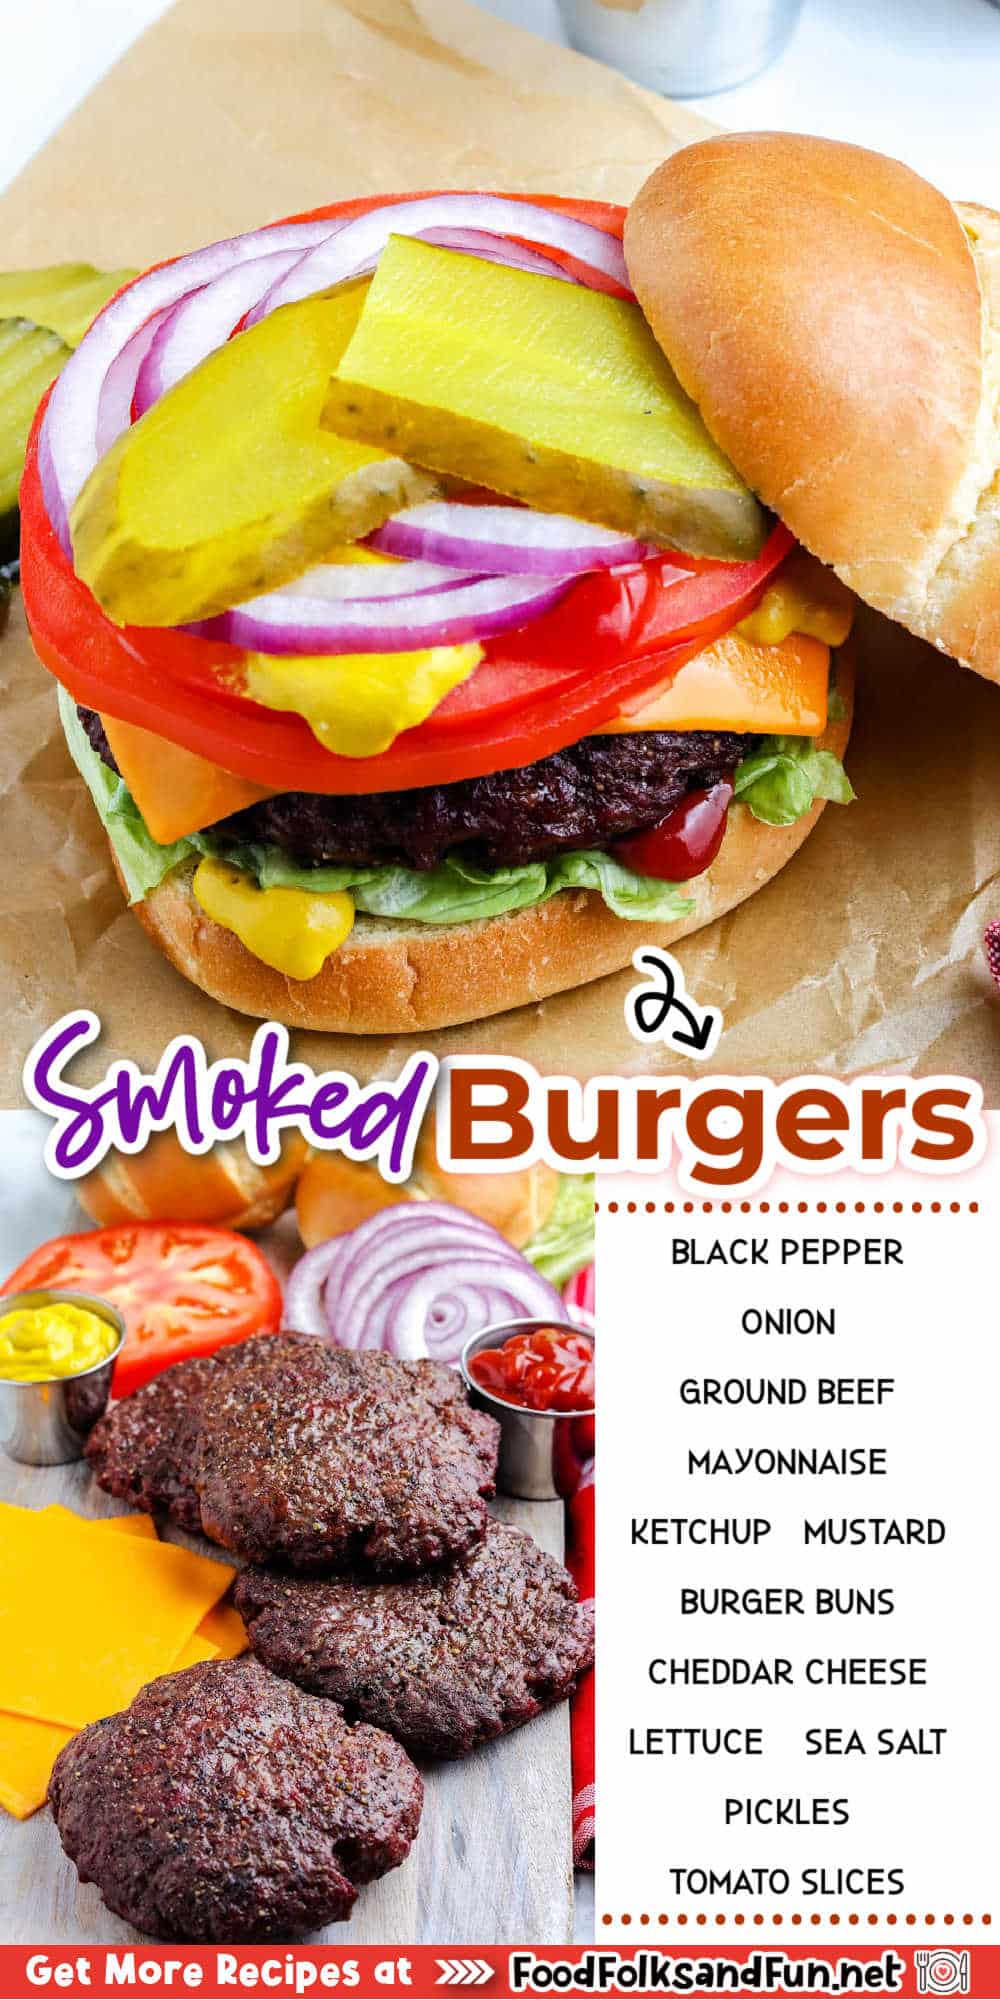 These Smoked Burgers are the best I’ve ever had. Bring a new dimension to your next grilled dinner with the help of your Traeger! via @foodfolksandfun